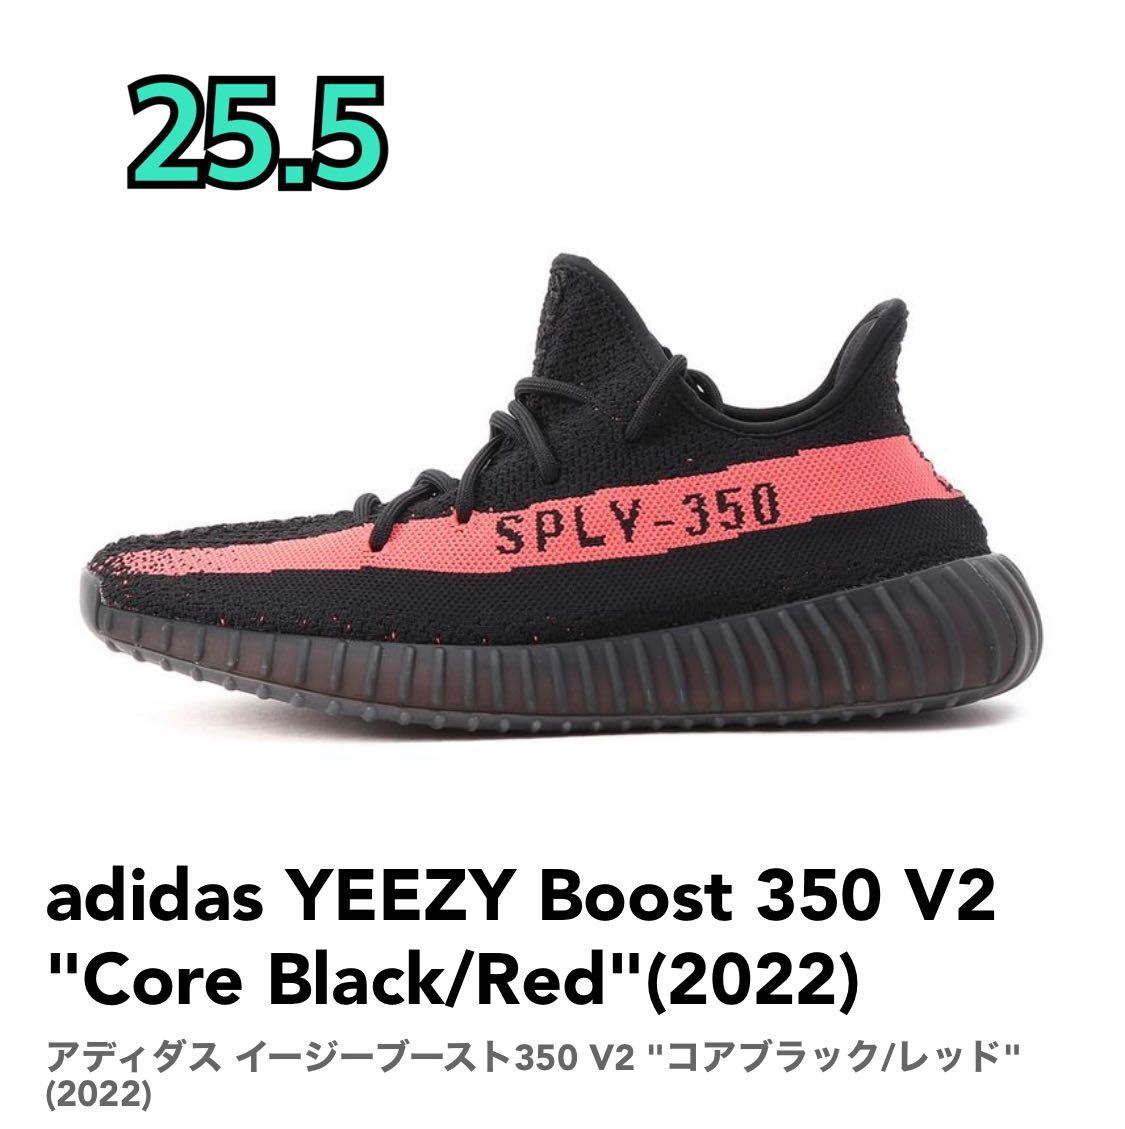 adidas YEEZY Boost 350 V2 Core Black/Red 25.5cm